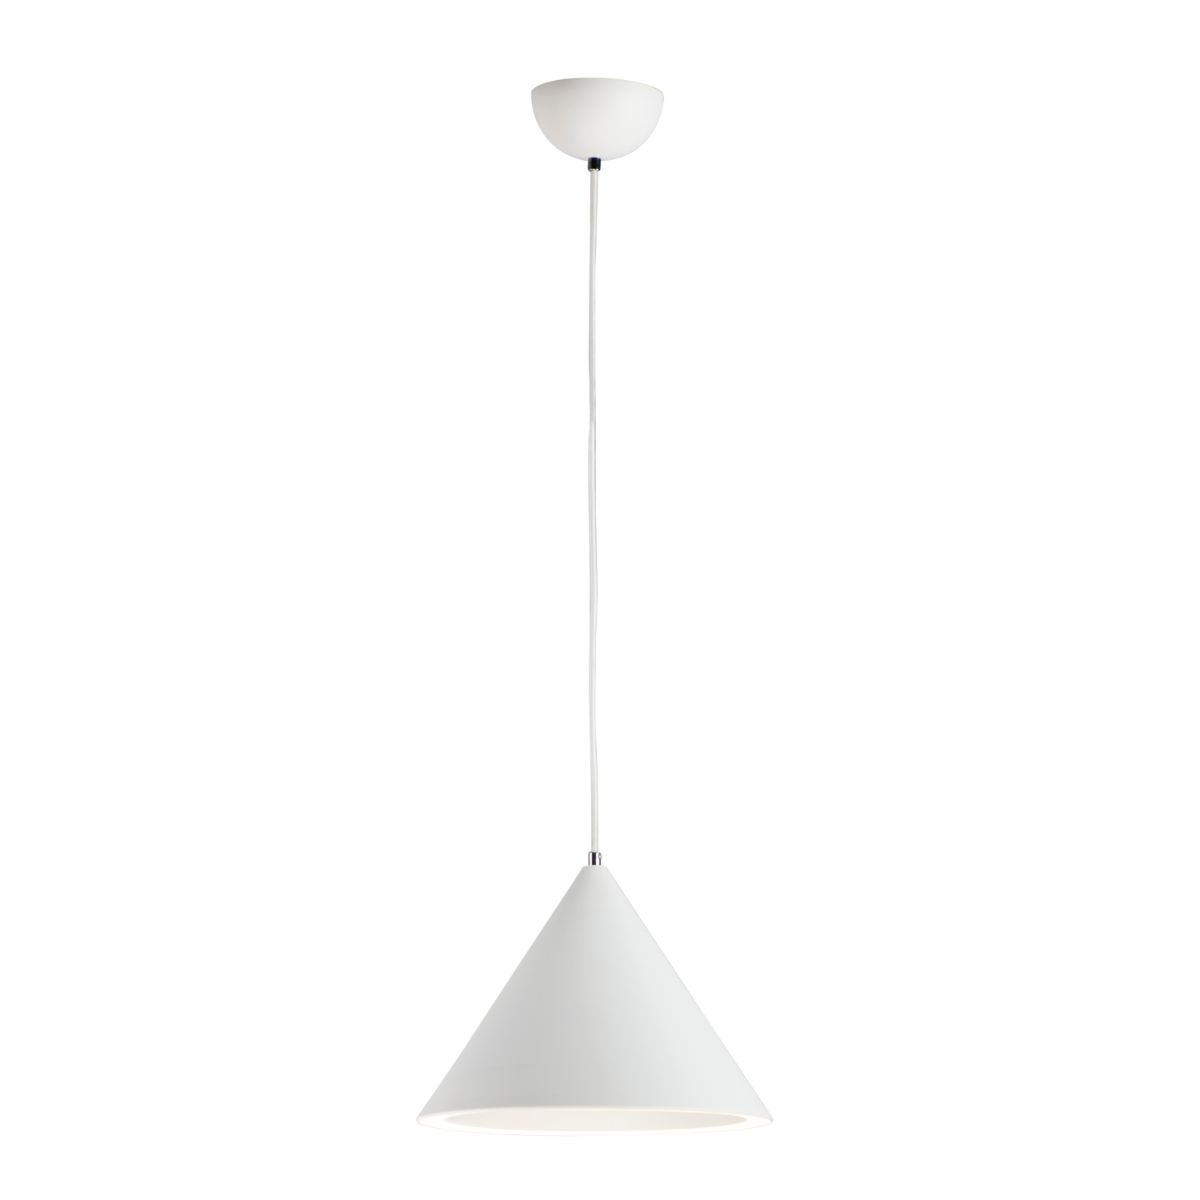 Abyss 13 in. LED Pendant Light